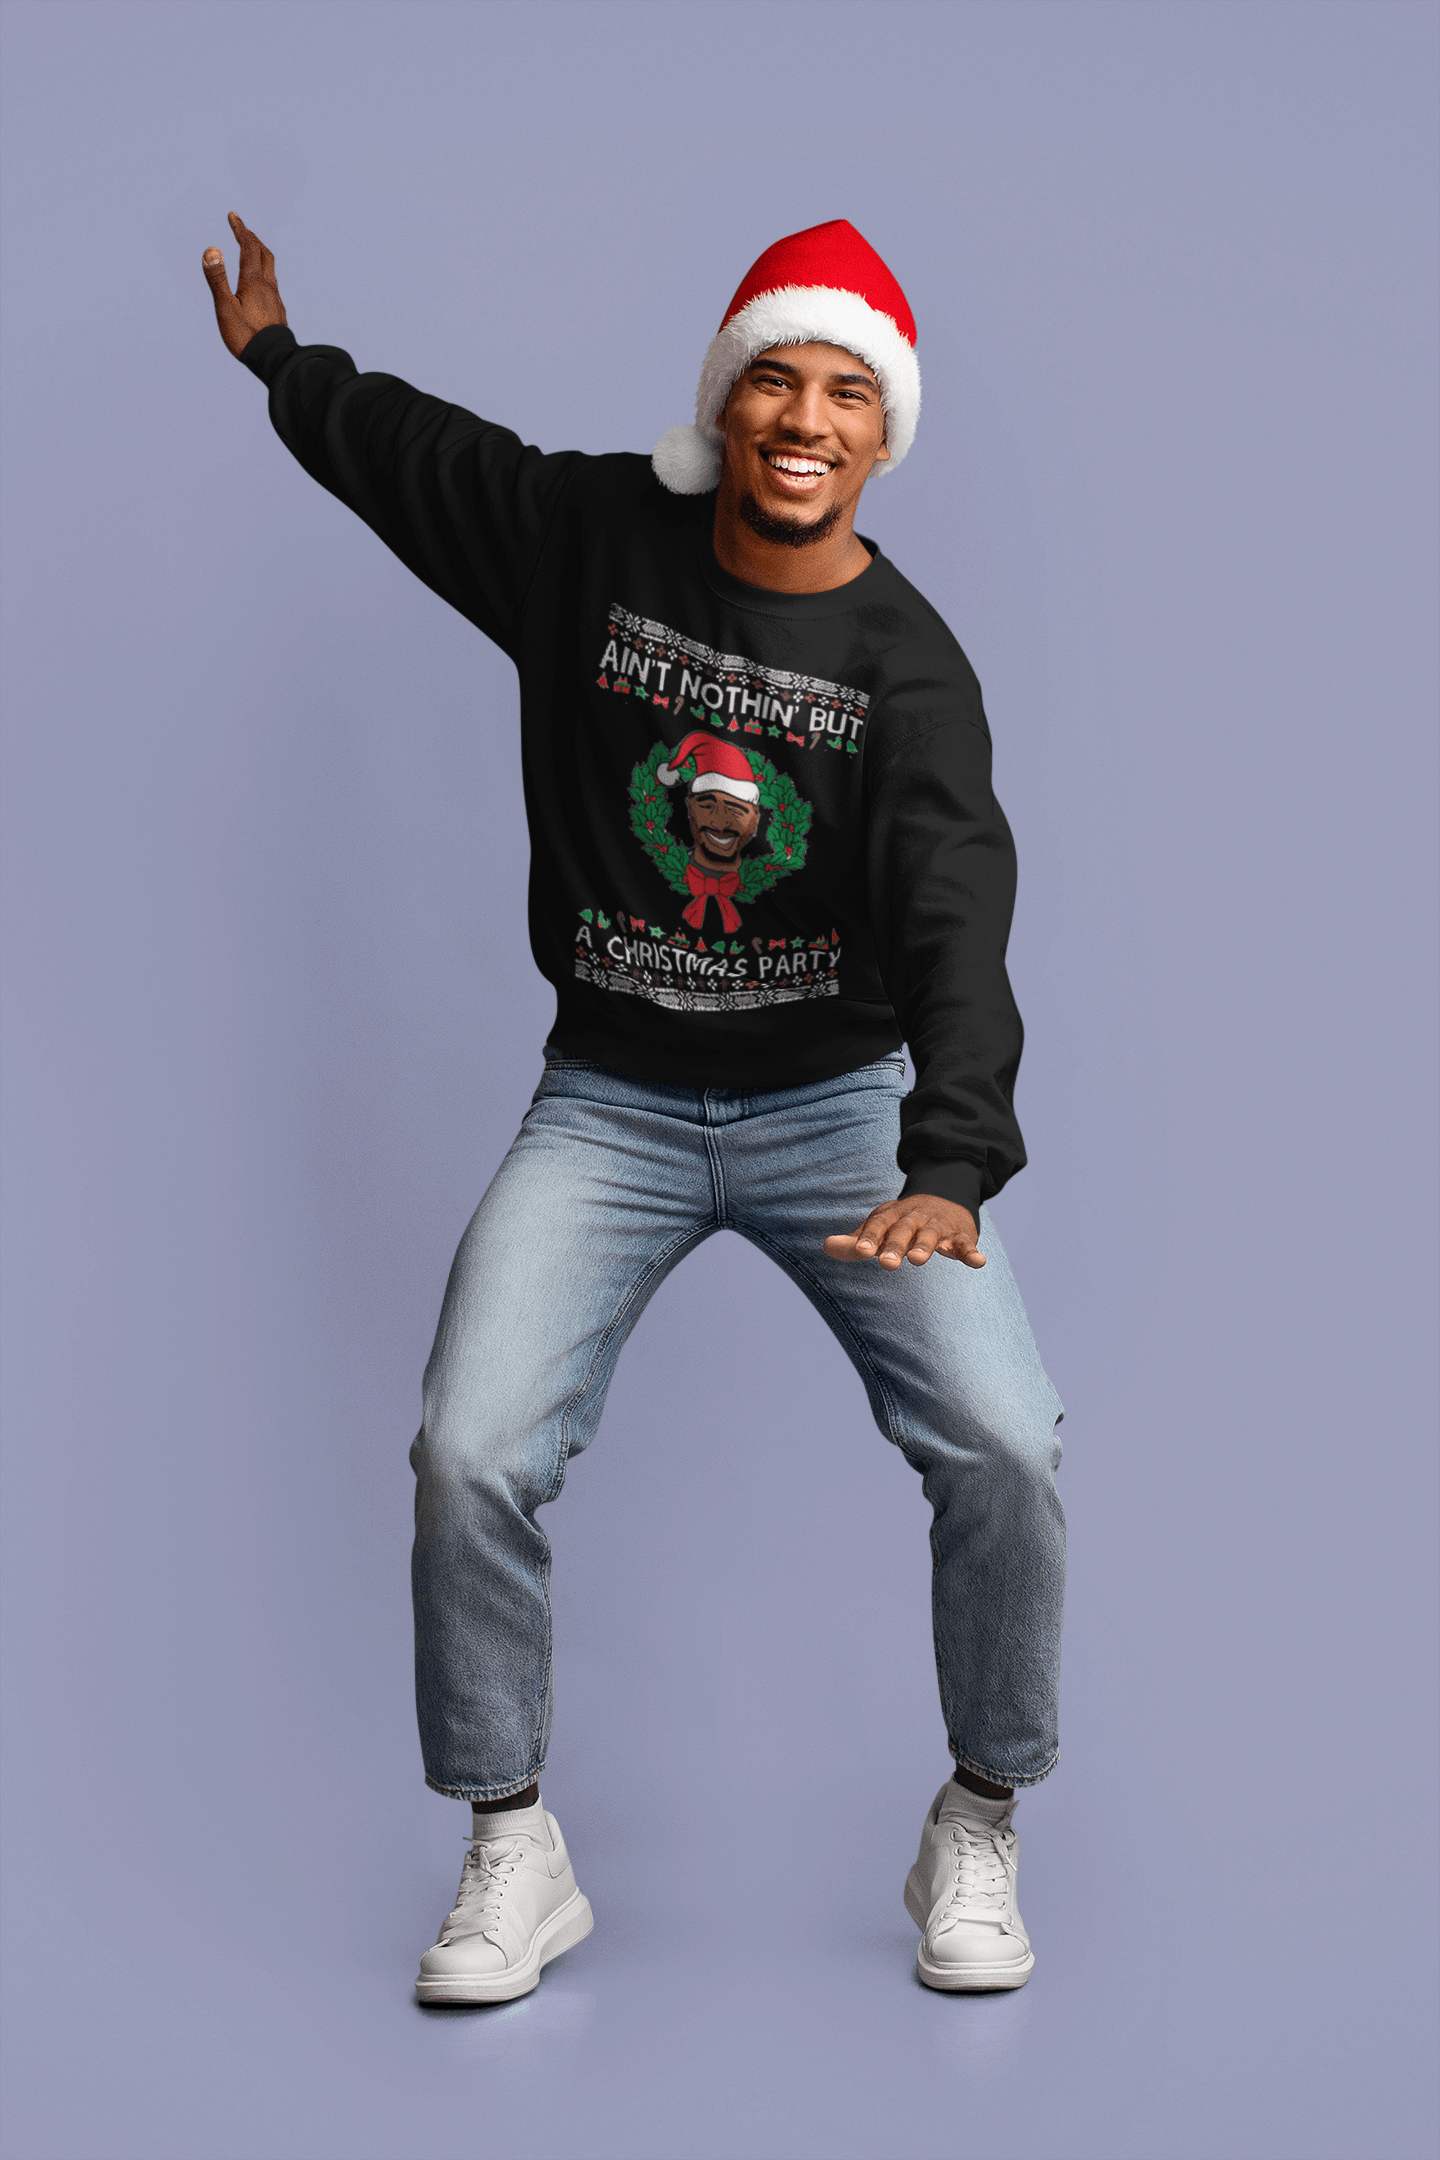 Ugly Christmas Sweater Aint Nothing But a Christmas Thing Ultra Soft Pullovers